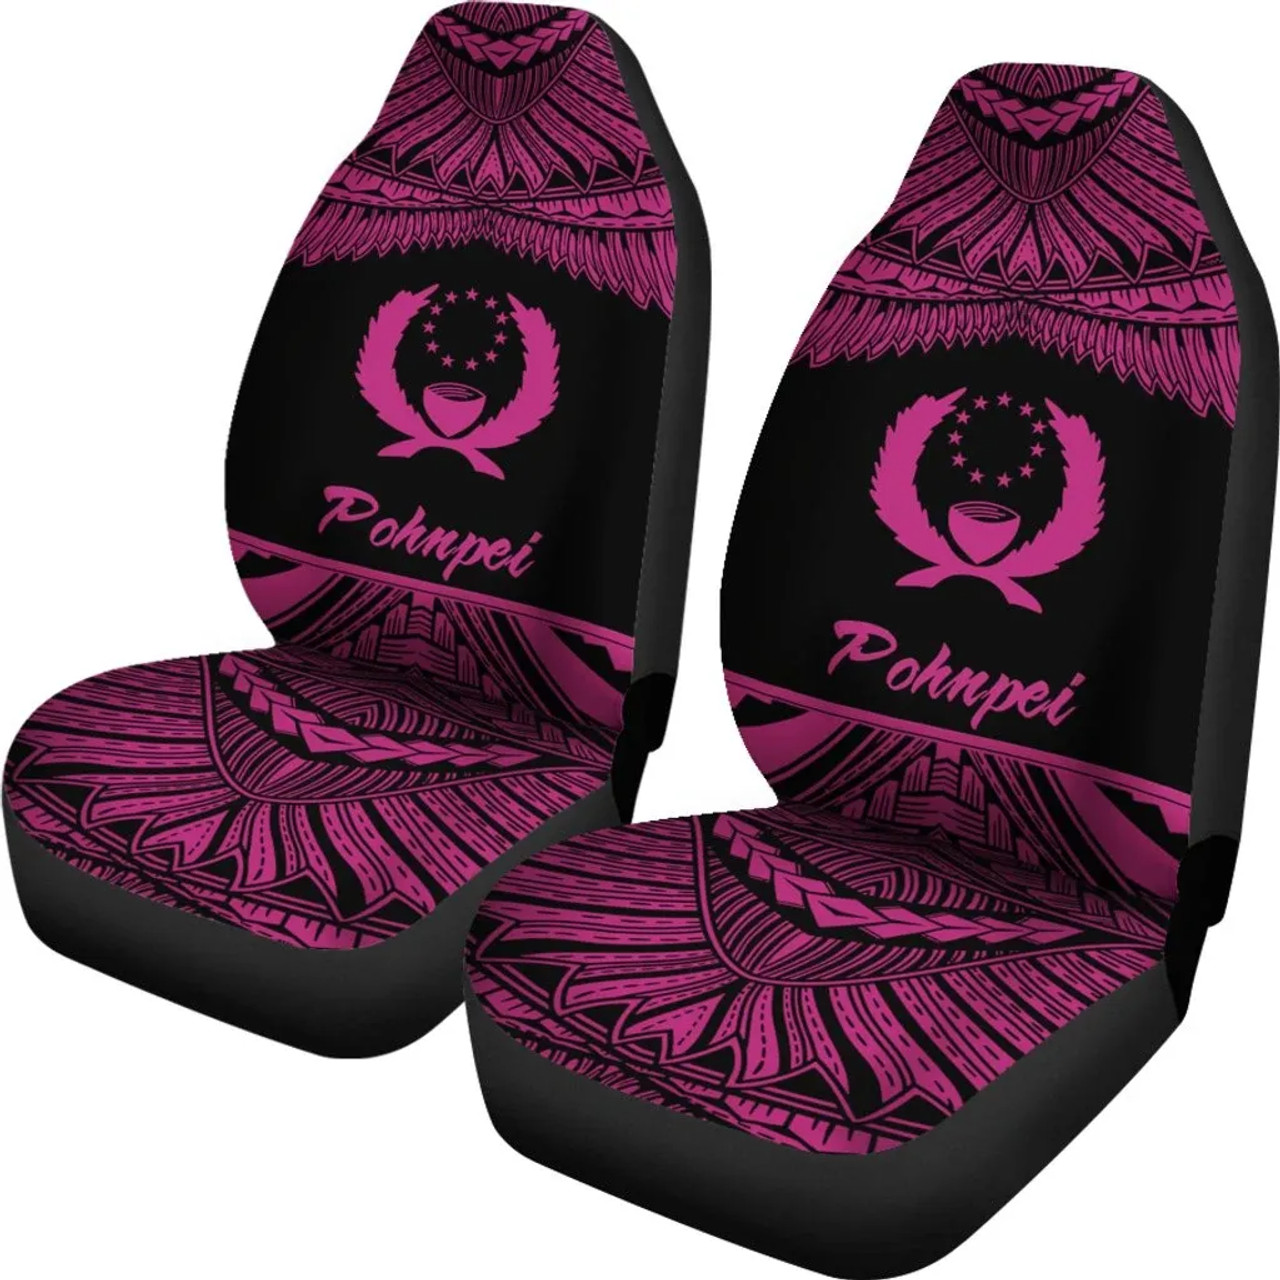 Pohnpei Polynesian Car Seat Covers - Pride Pink Version